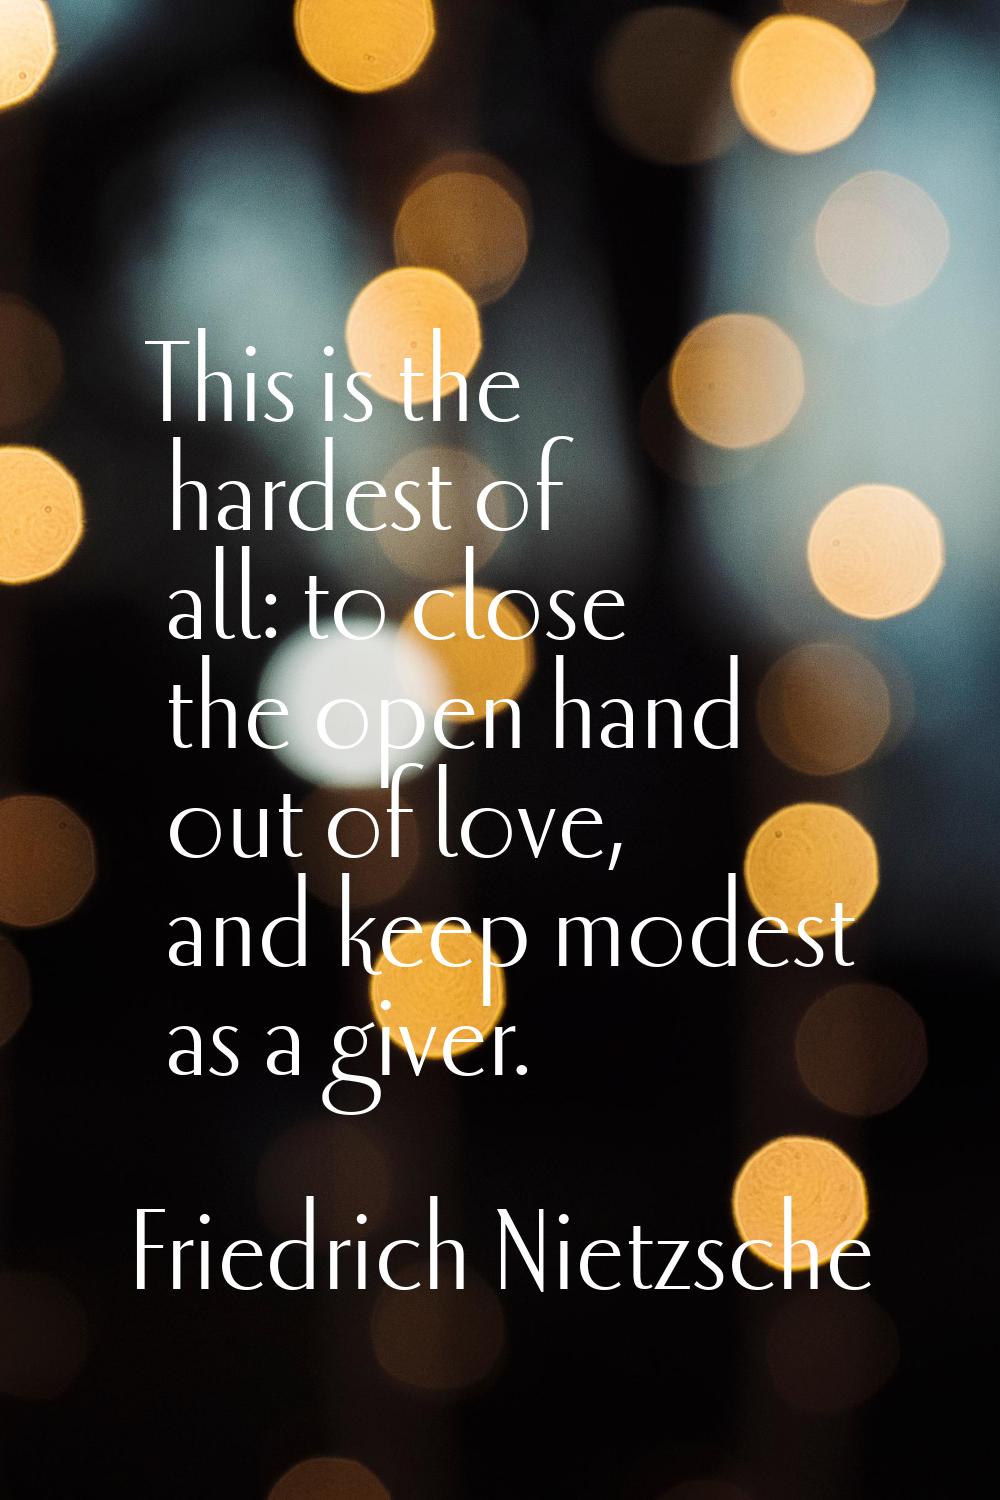 This is the hardest of all: to close the open hand out of love, and keep modest as a giver.